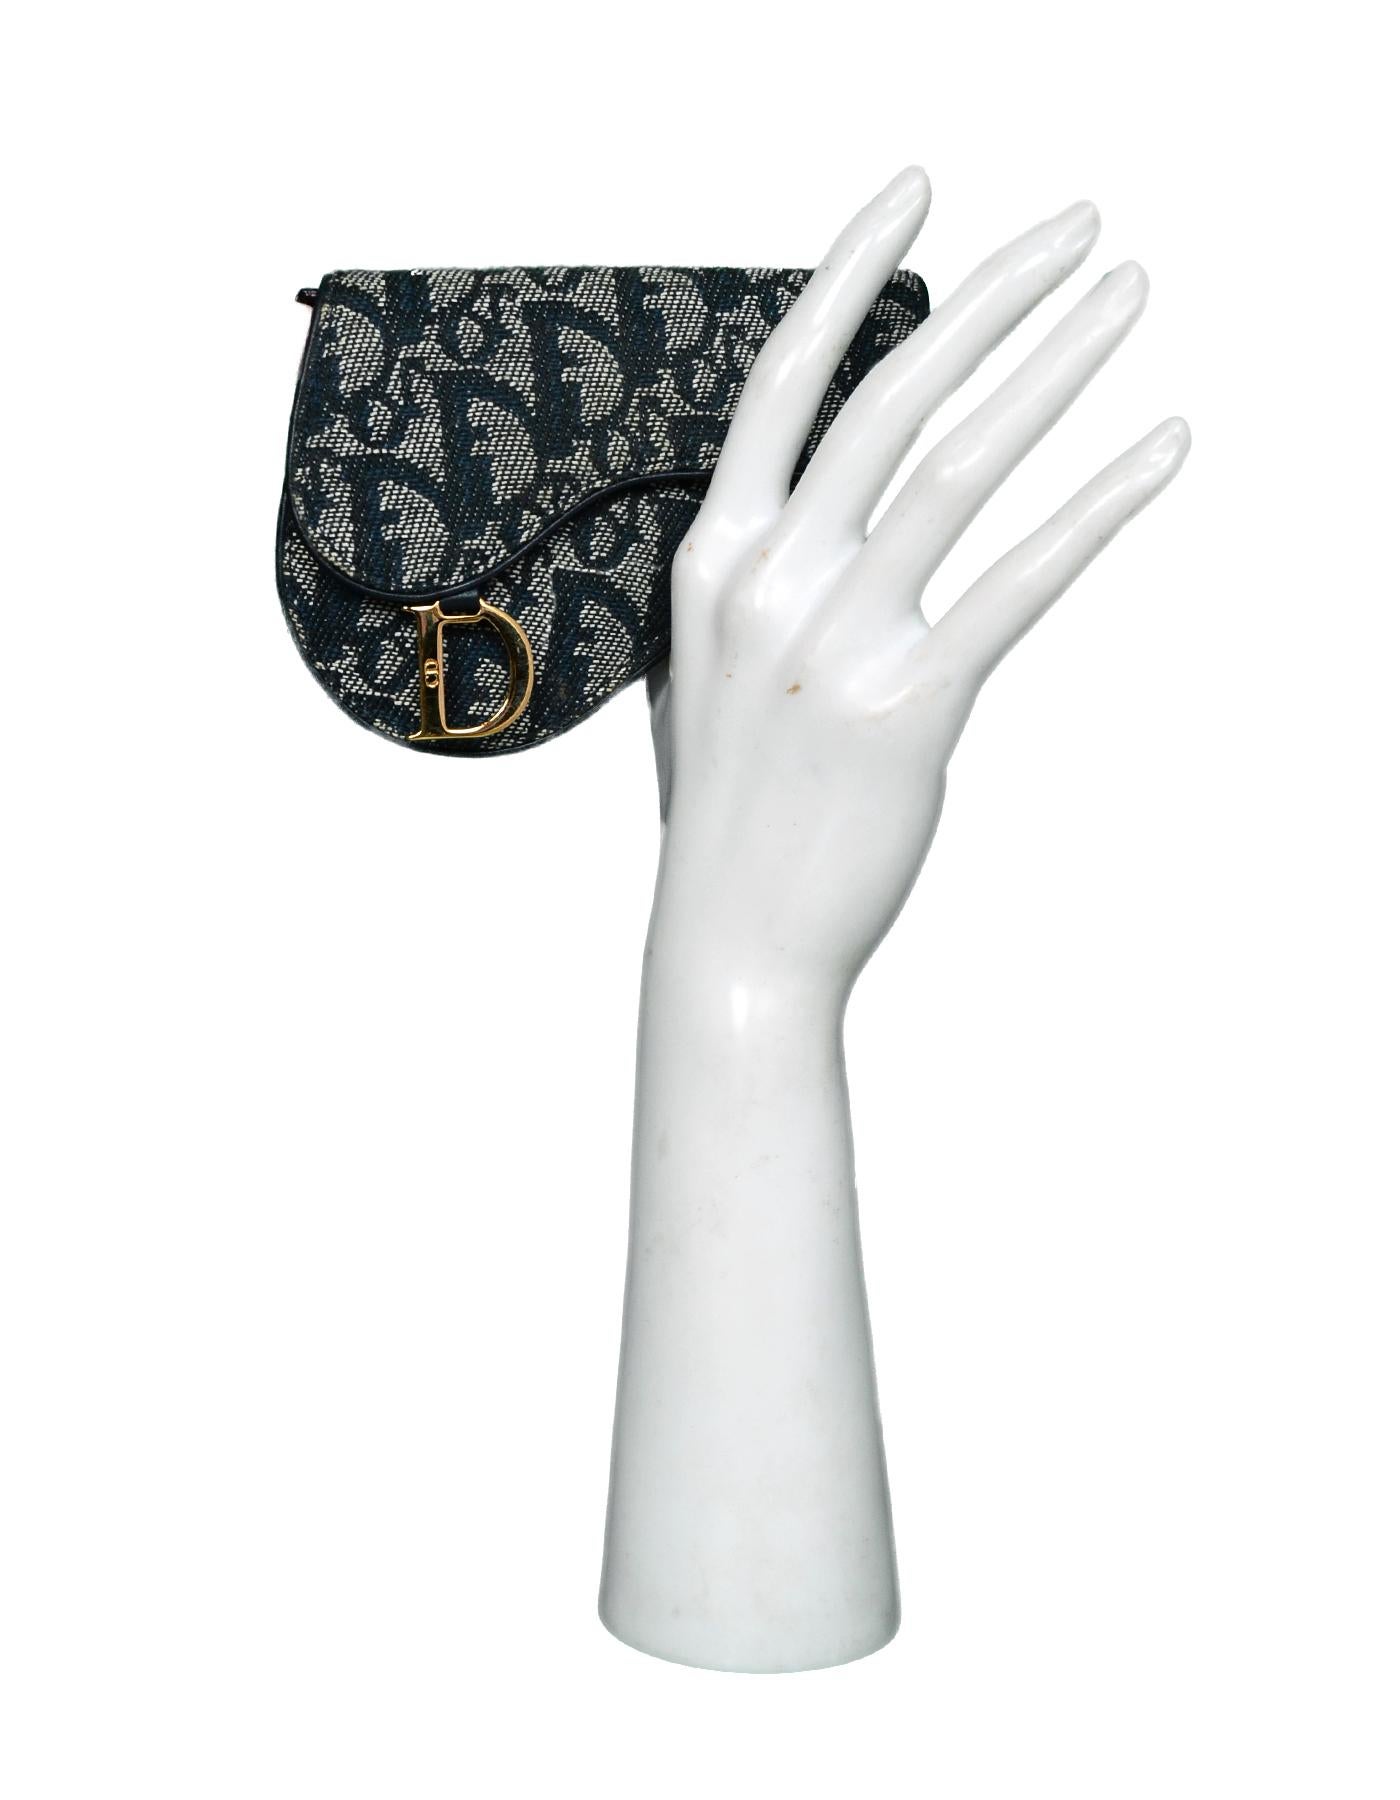 Christian Dior Blue Monogram Saddle Coin Purse

Made In: Italy
Year of Production: 2001
Color: Navy blue
Hardware: Goldtone
Materials: Canvas, leather, and metal
Lining: Blue leather and canvas
Closure/Opening: Flap with snap closure 
Exterior